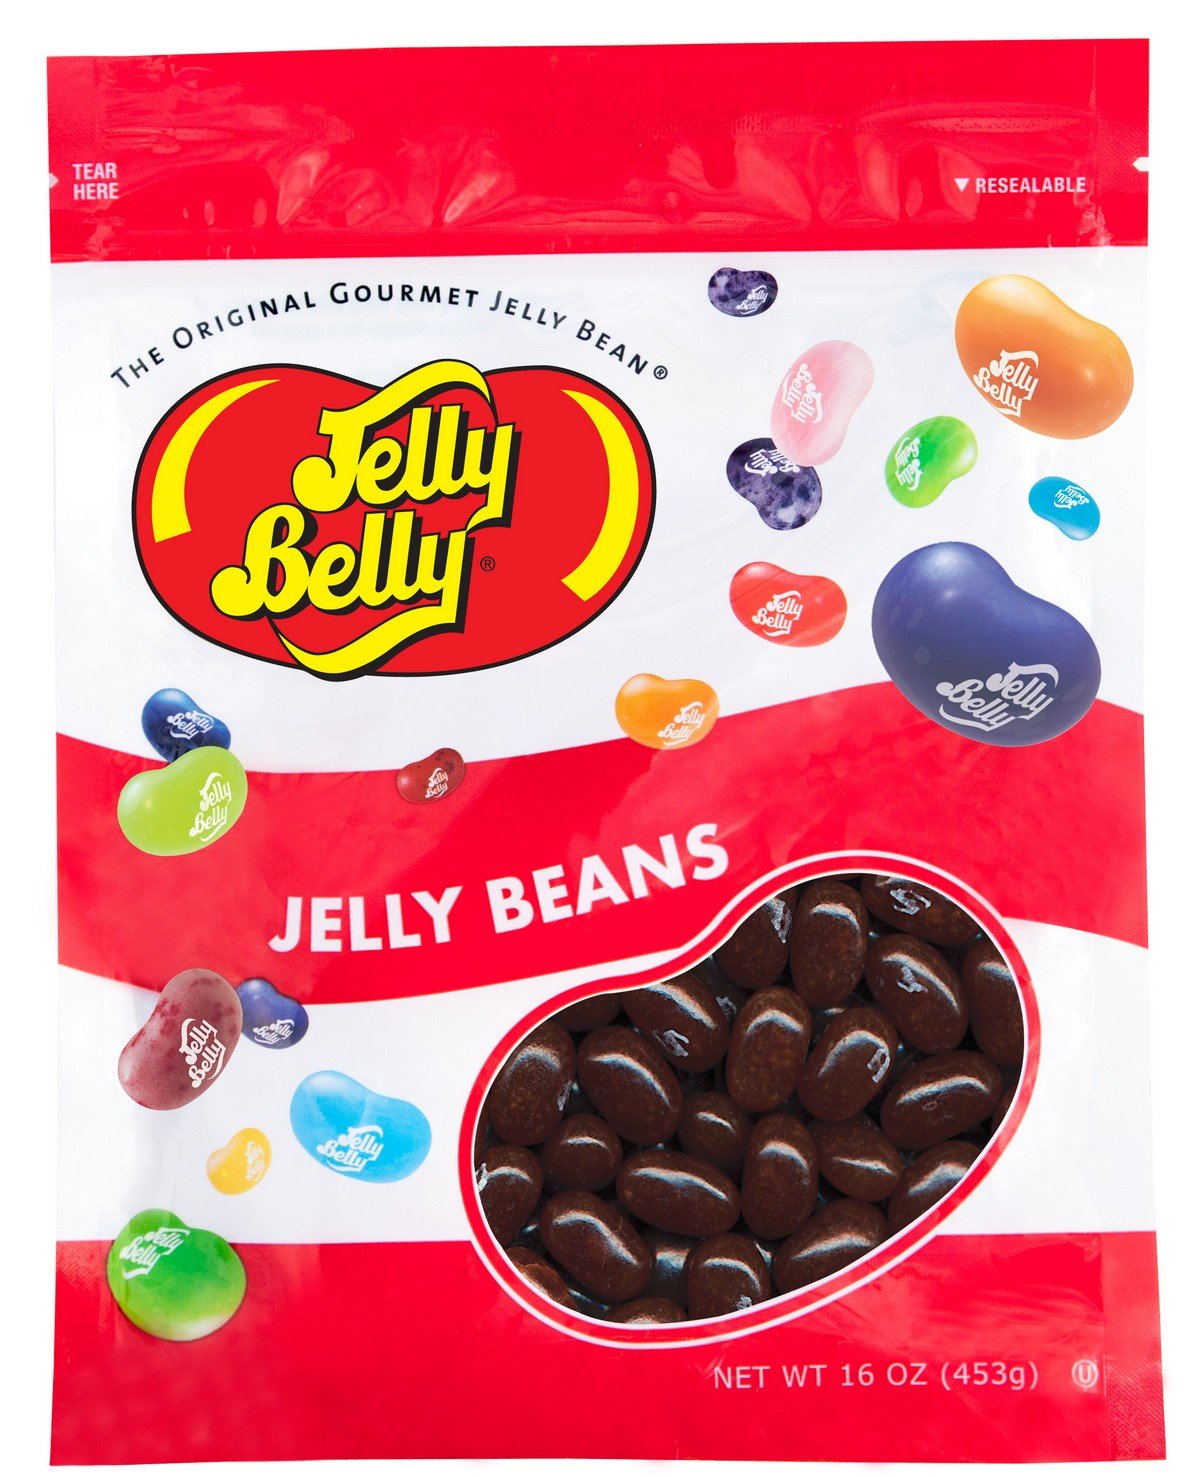 Bag of A&W Root Beer-flavored Jelly Belly jelly beans. 